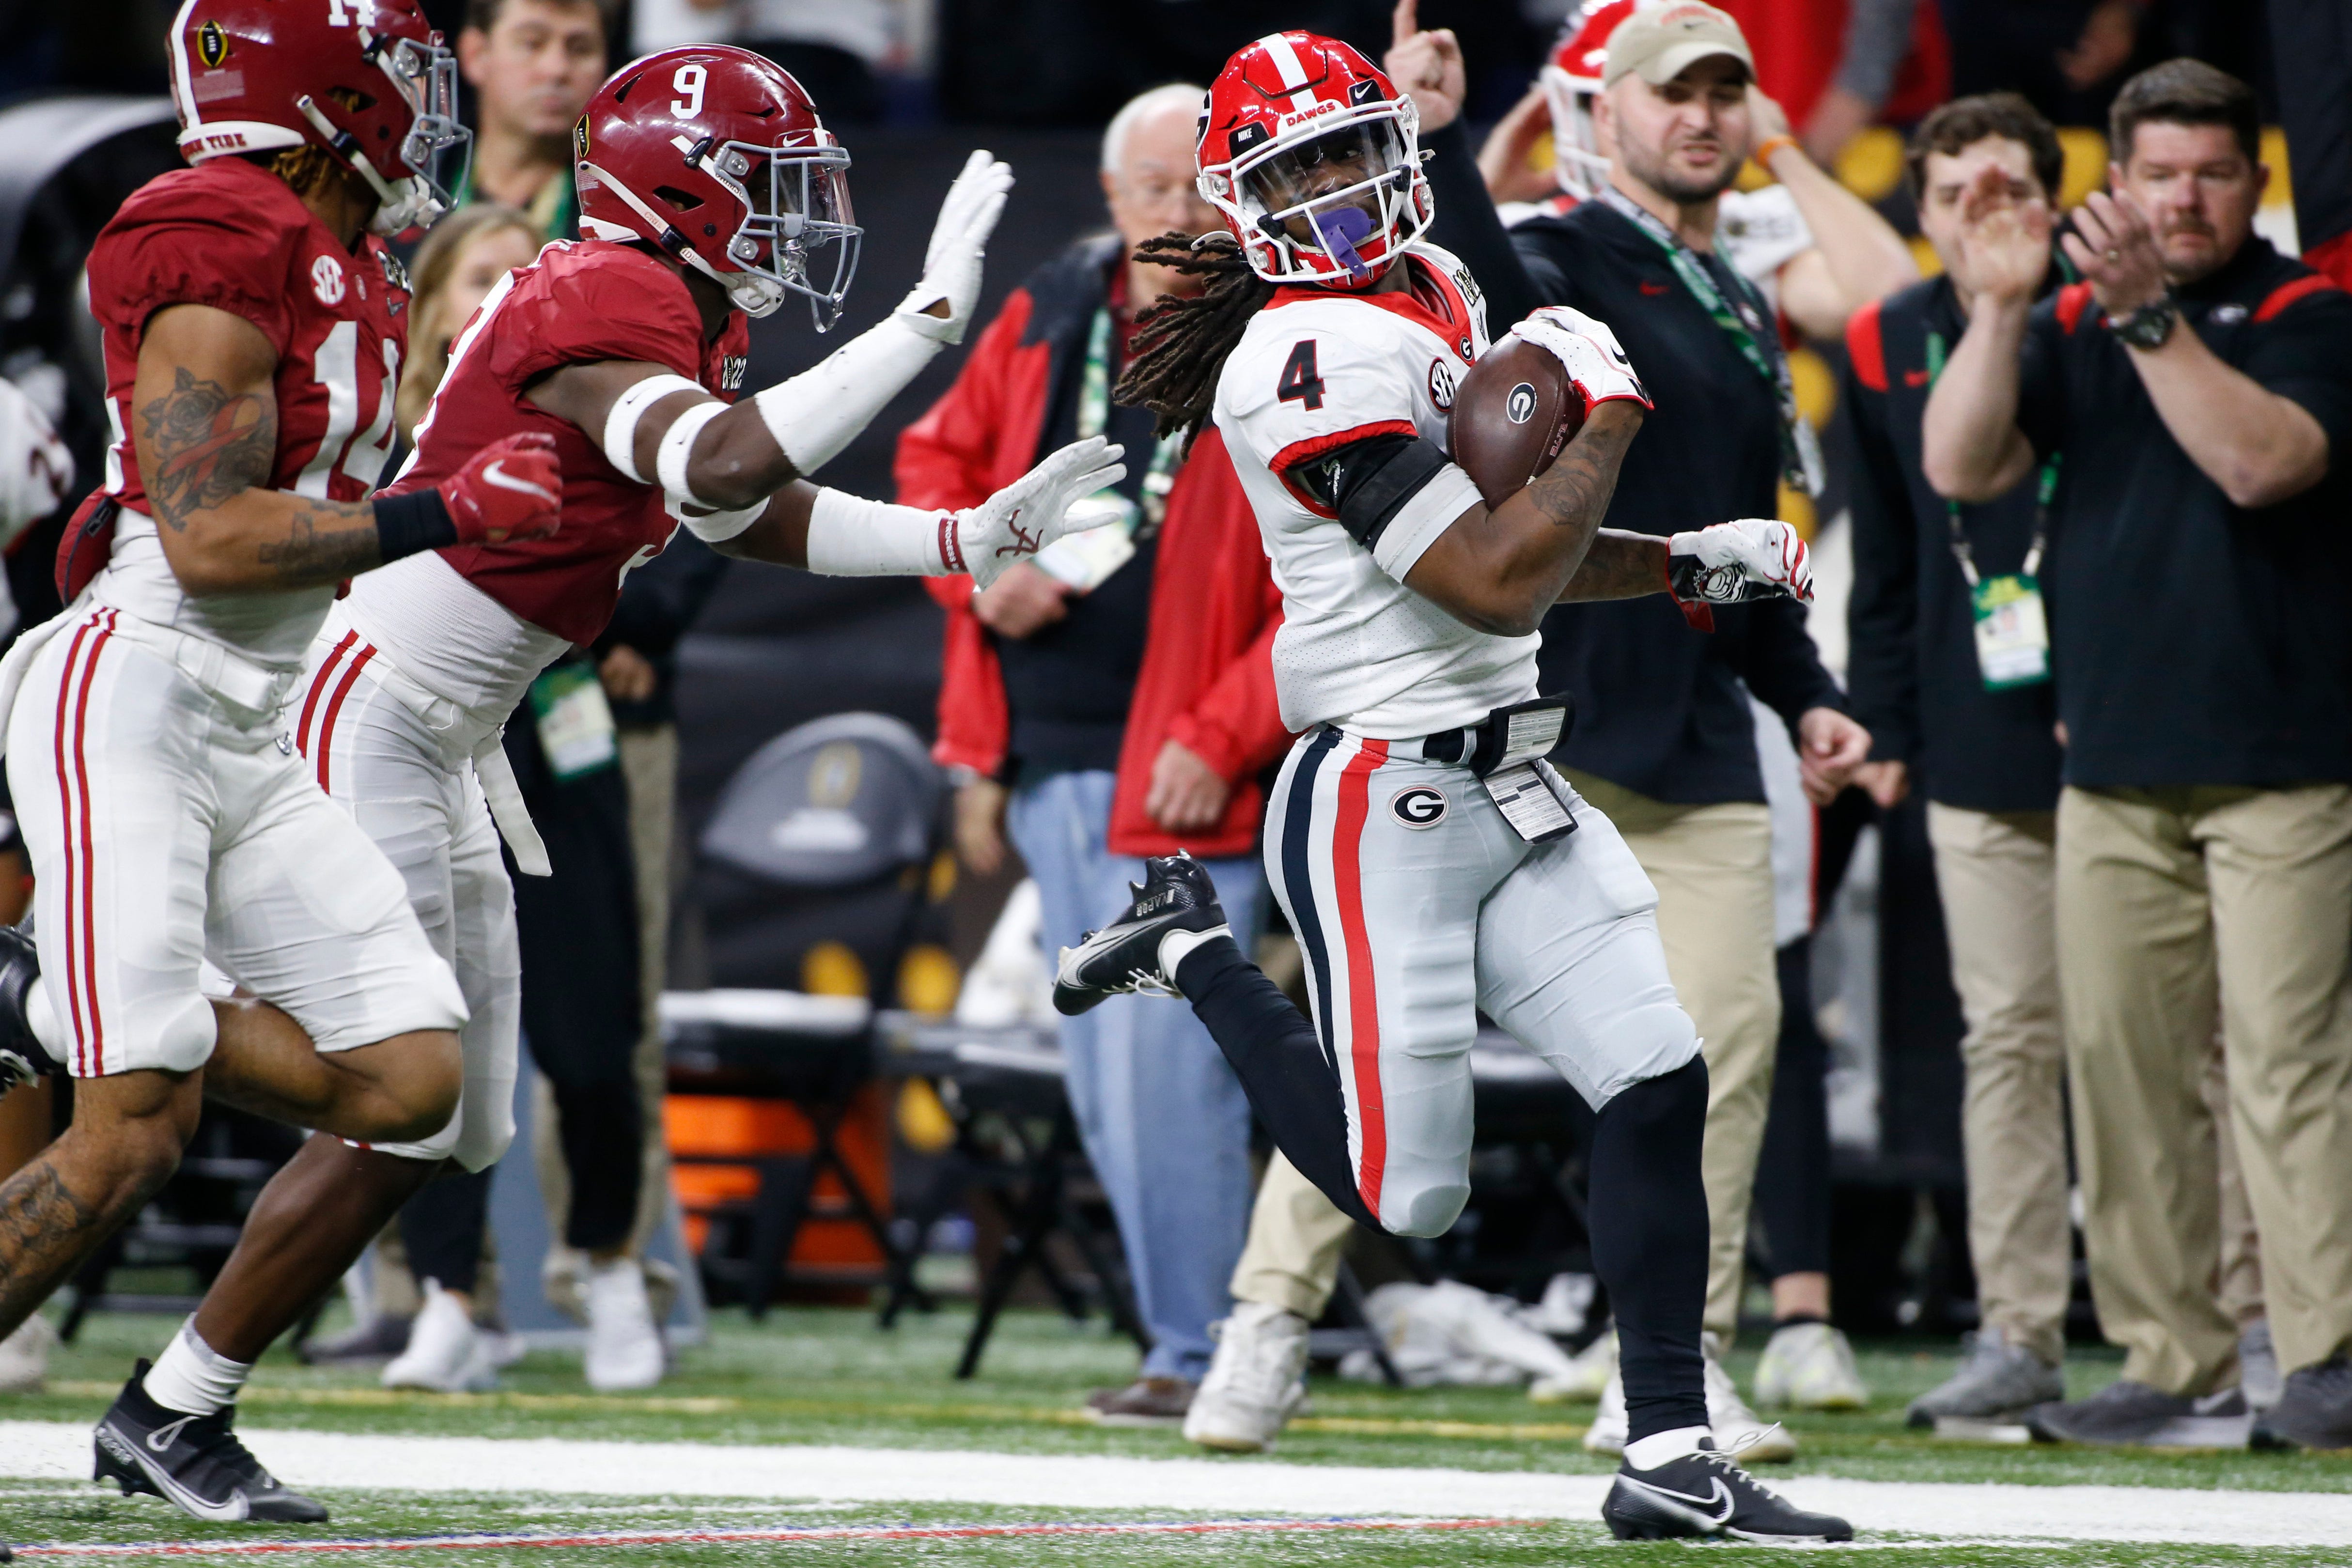 Georgia Bulldogs running back James Cook (4) breaks away for a 67 yard rush during the College Football Playoff National Championship against Alabama at Lucas Oil Stadium on Monday, Jan. 10, 2022, in Indianapolis. Georgia won 33-18. News Joshua L Jones